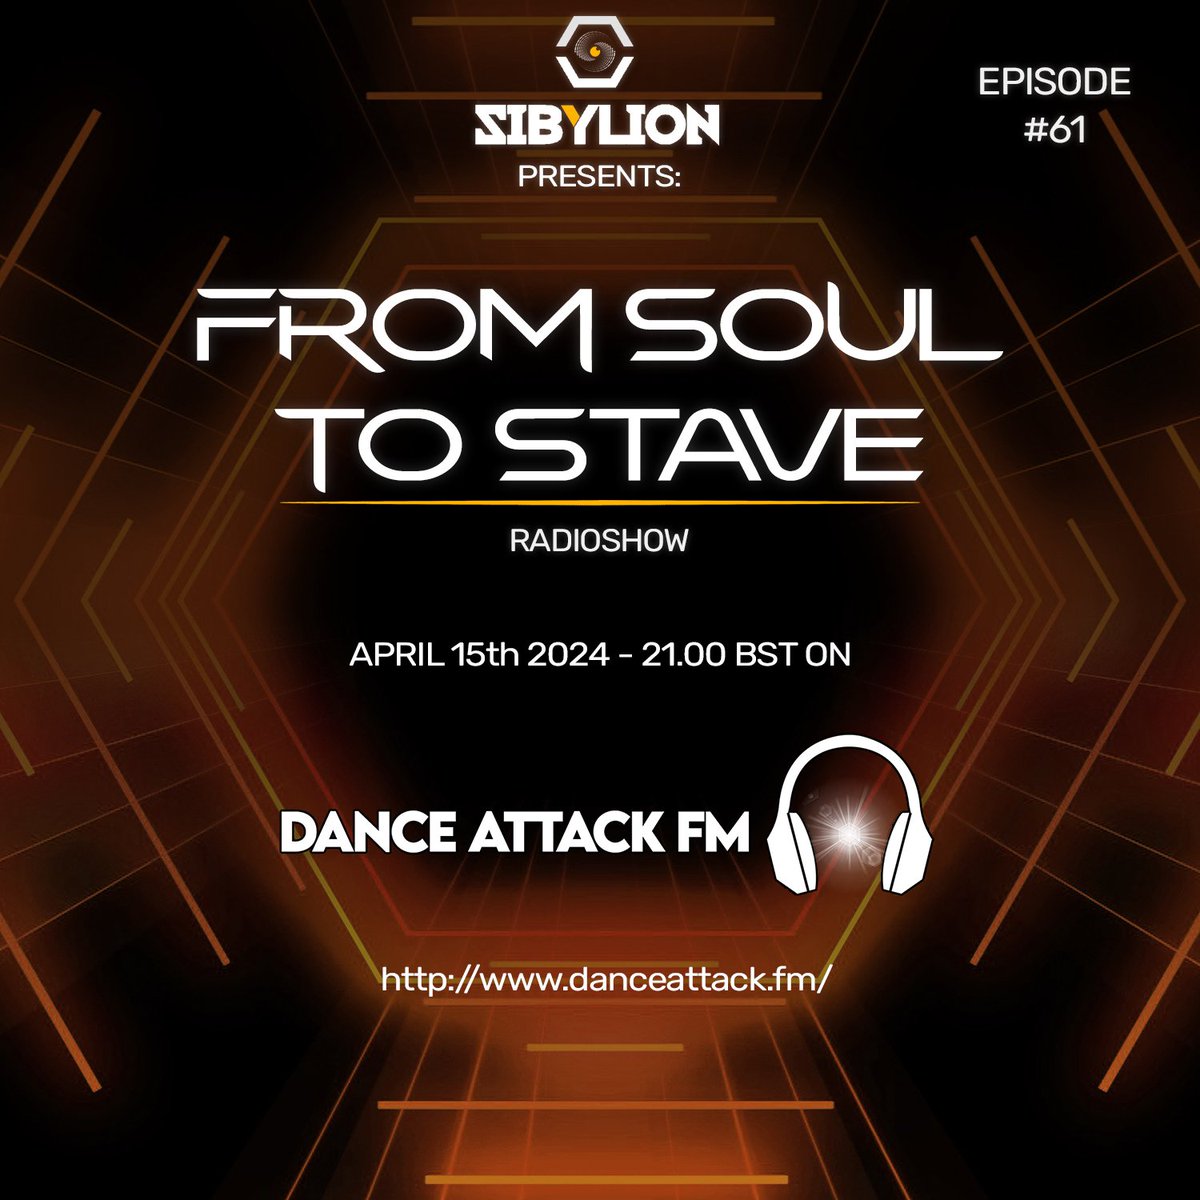 Happy Monday everyone! Let's begin the week in Trance with FSTS #61 on @DanceAttackFM! 🔥🔊 Today at 9pm BST!
Link to listen: danceattack.fm

#trancefamily #sibylion #fromsoultostave #radioshow #trance #trancemusic